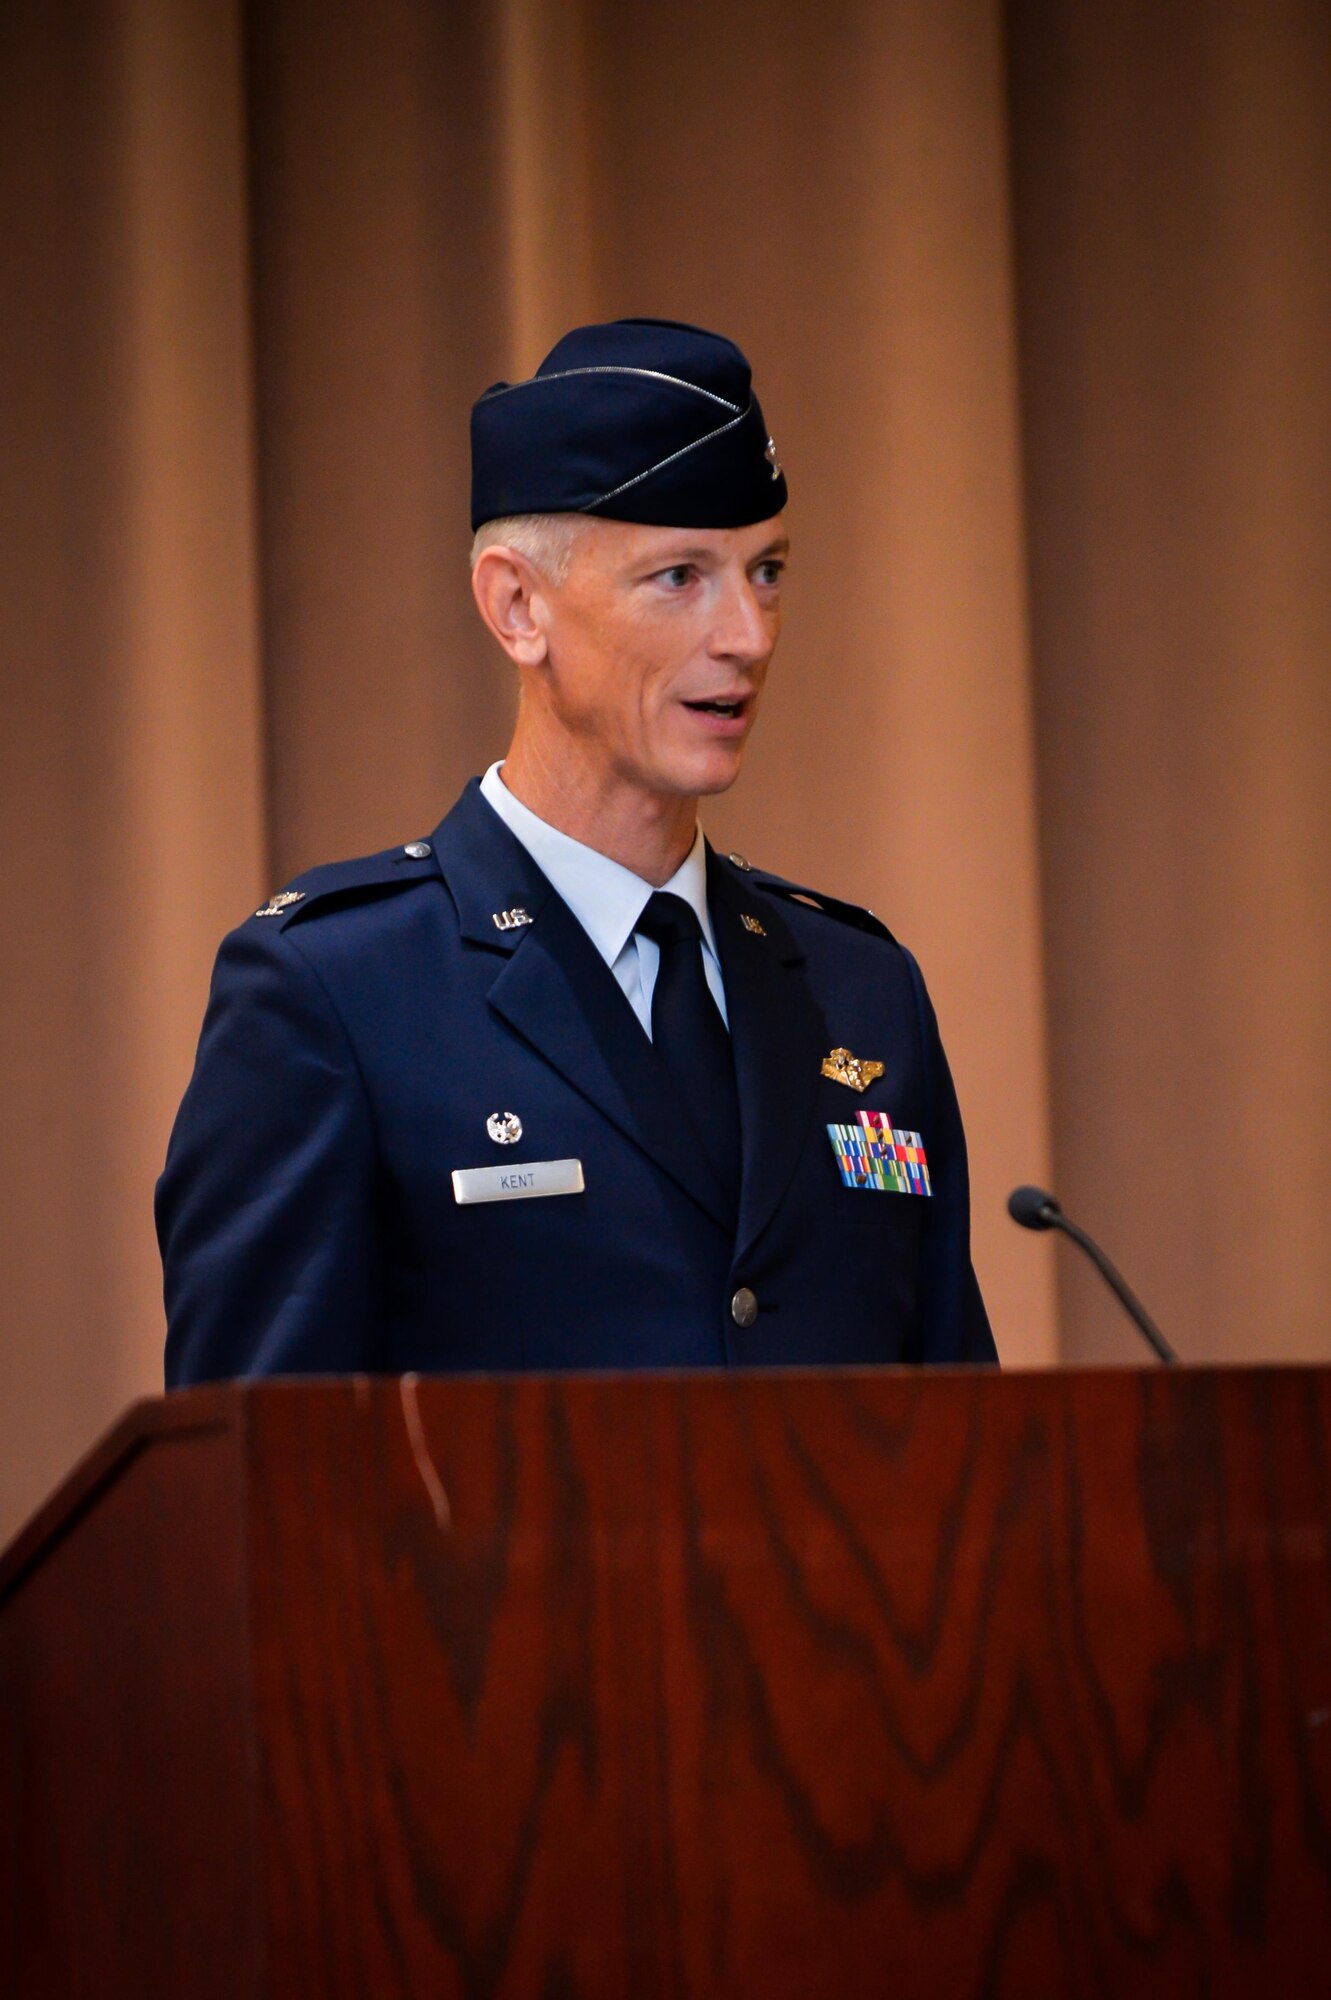 Col. Kent takes command of 2nd MDG > Barksdale Air Force Base > Display